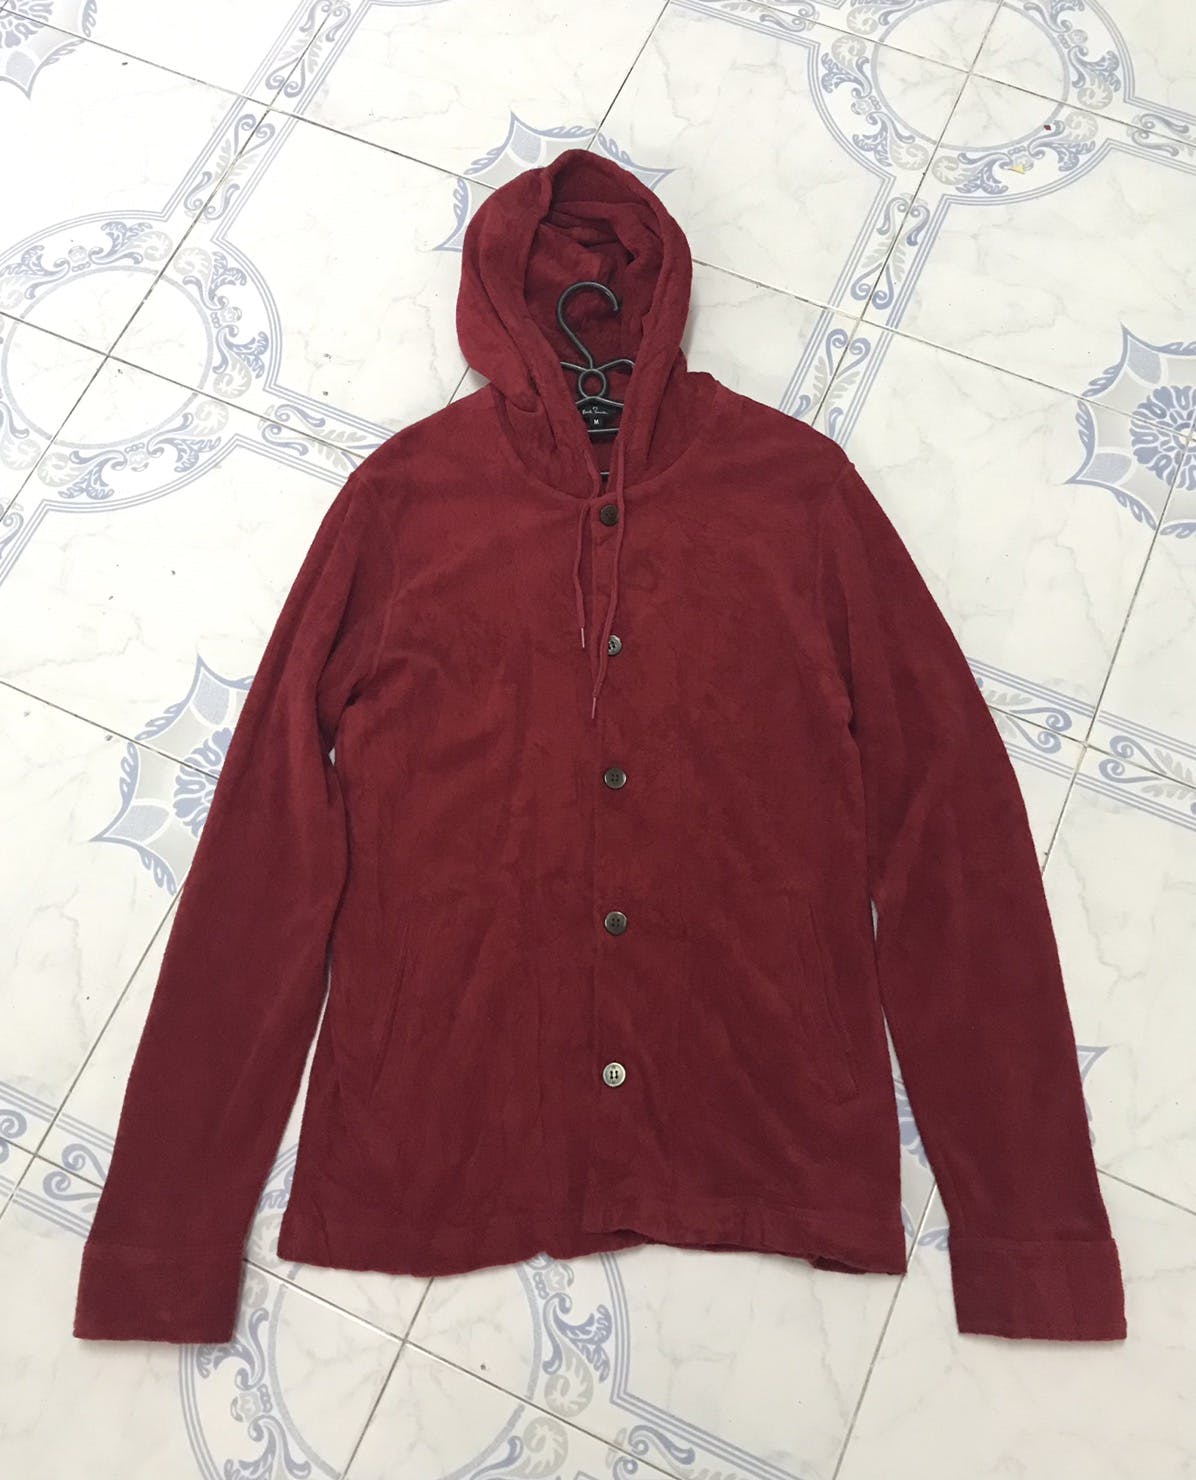 Paul Smith Button Up Hoodie Jacket Made in Japan - 11